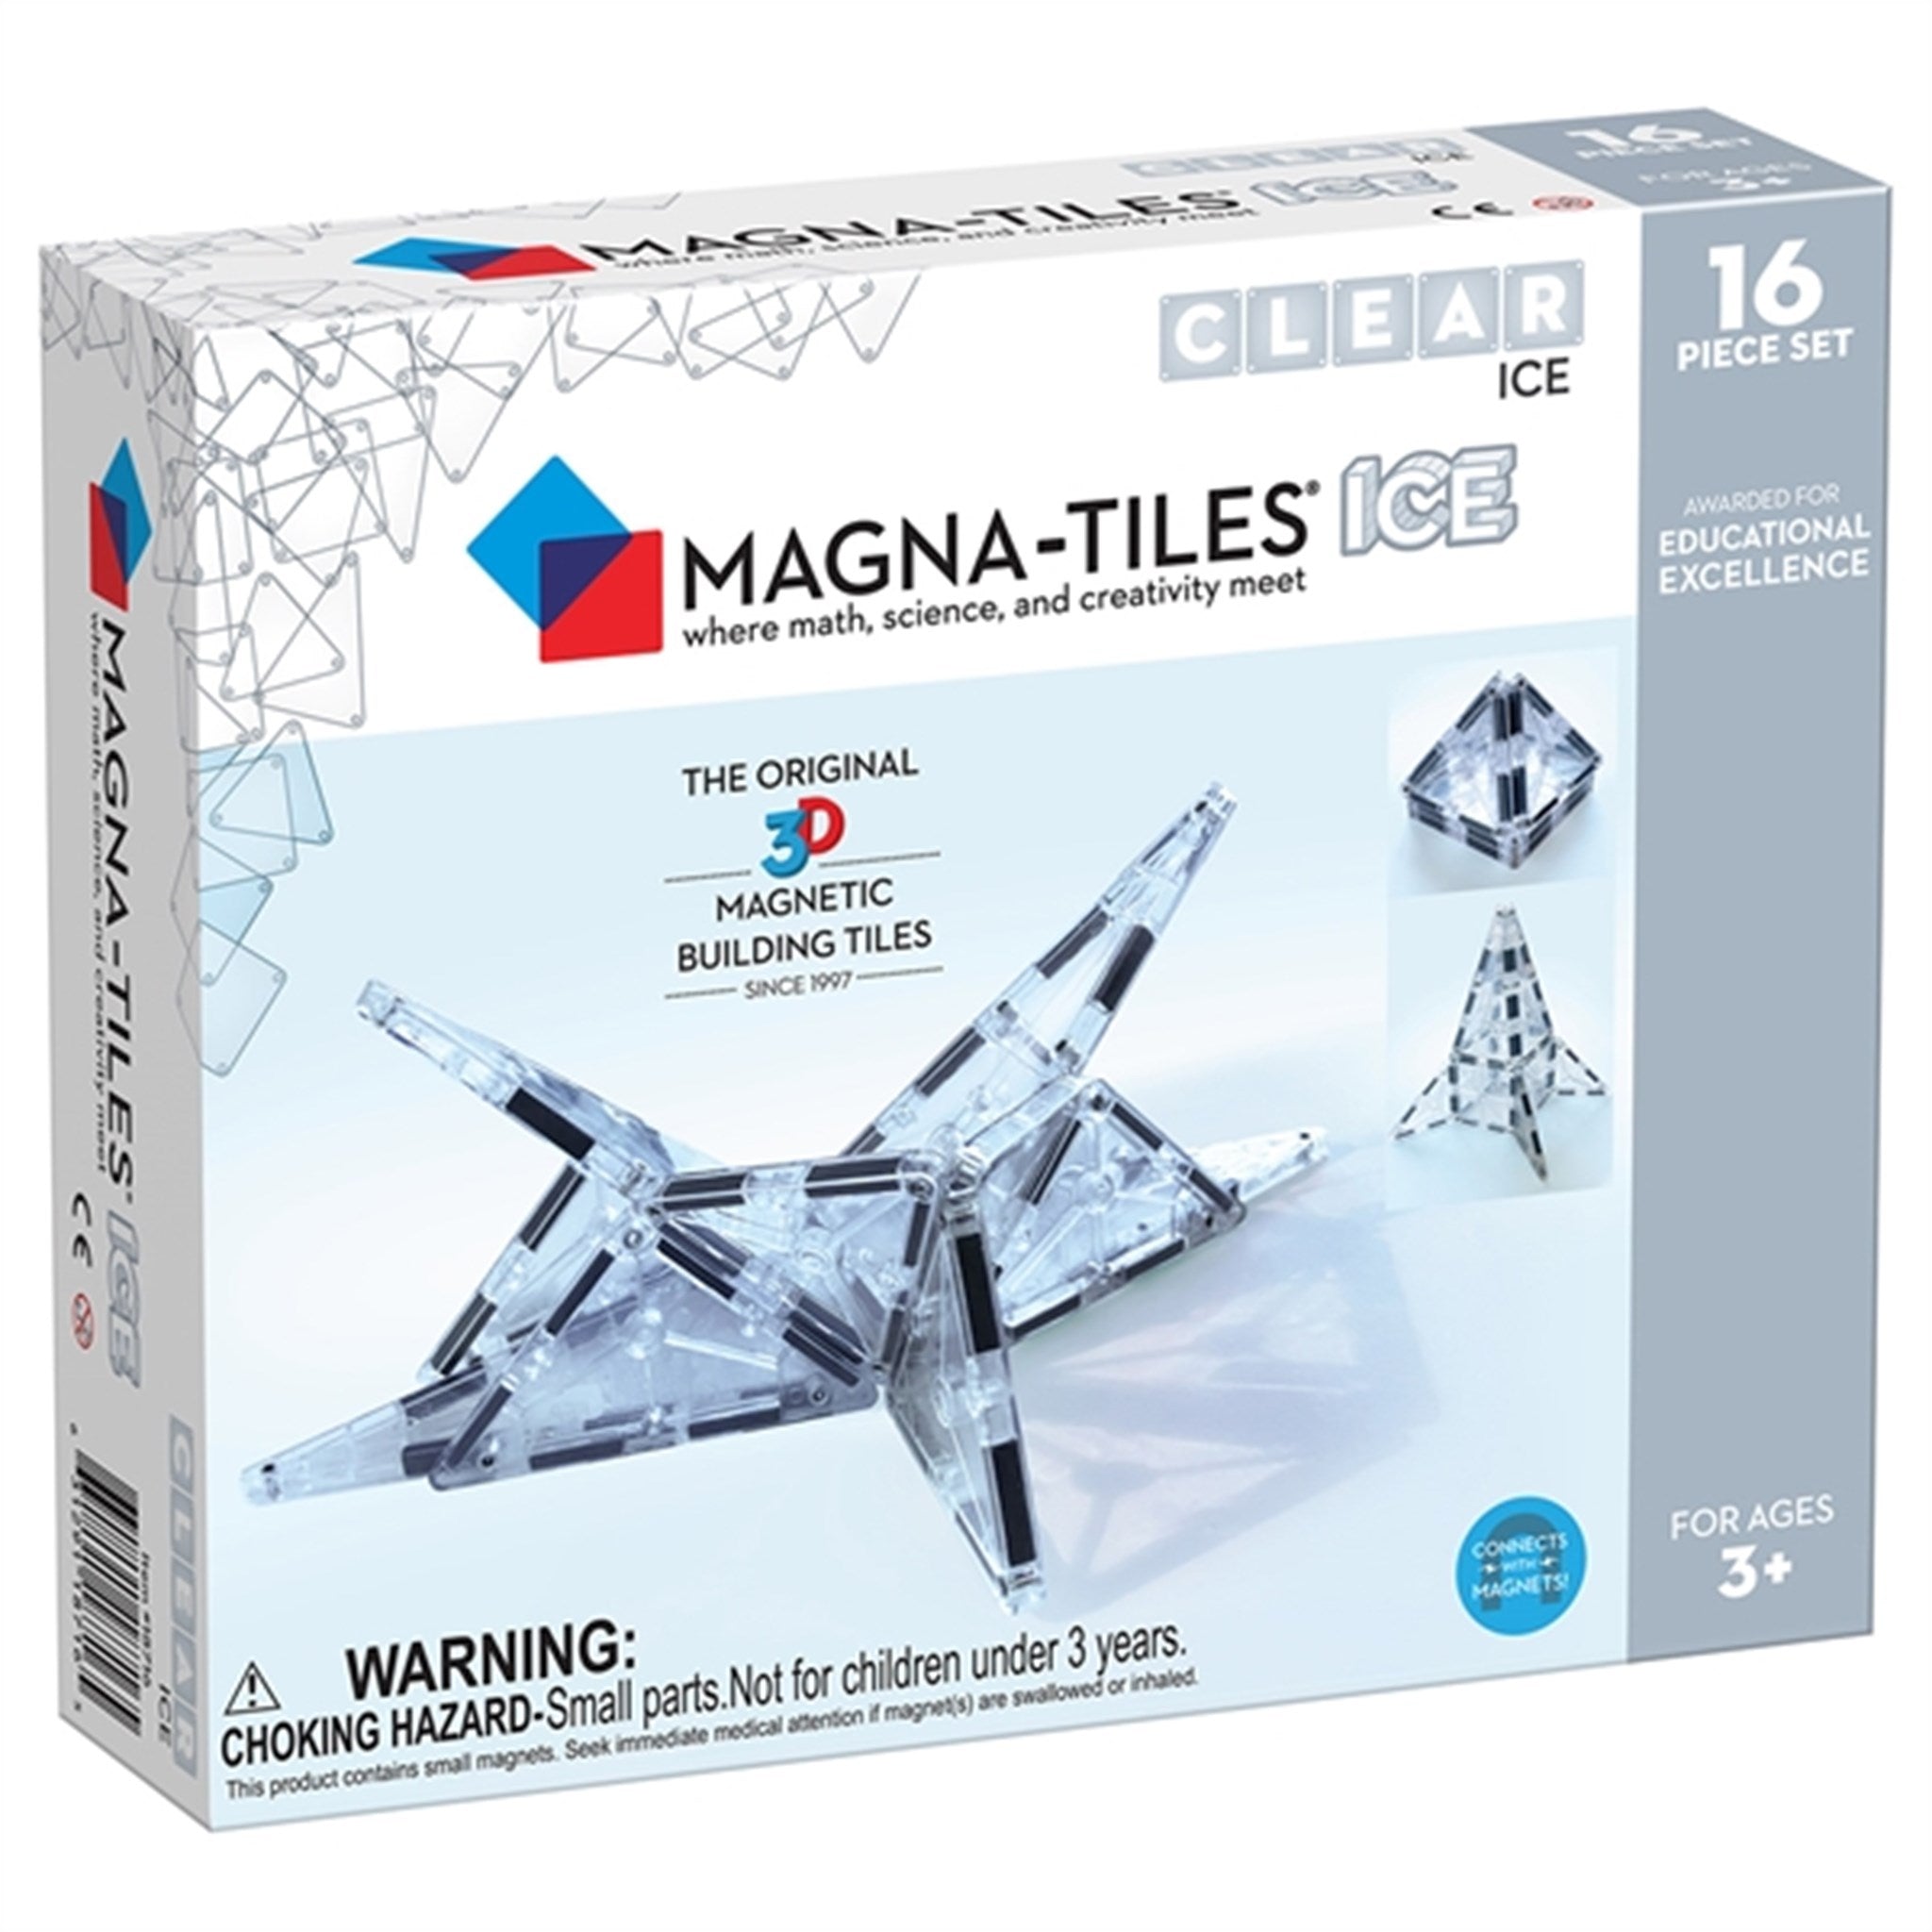 Magformers Wow Plus Set